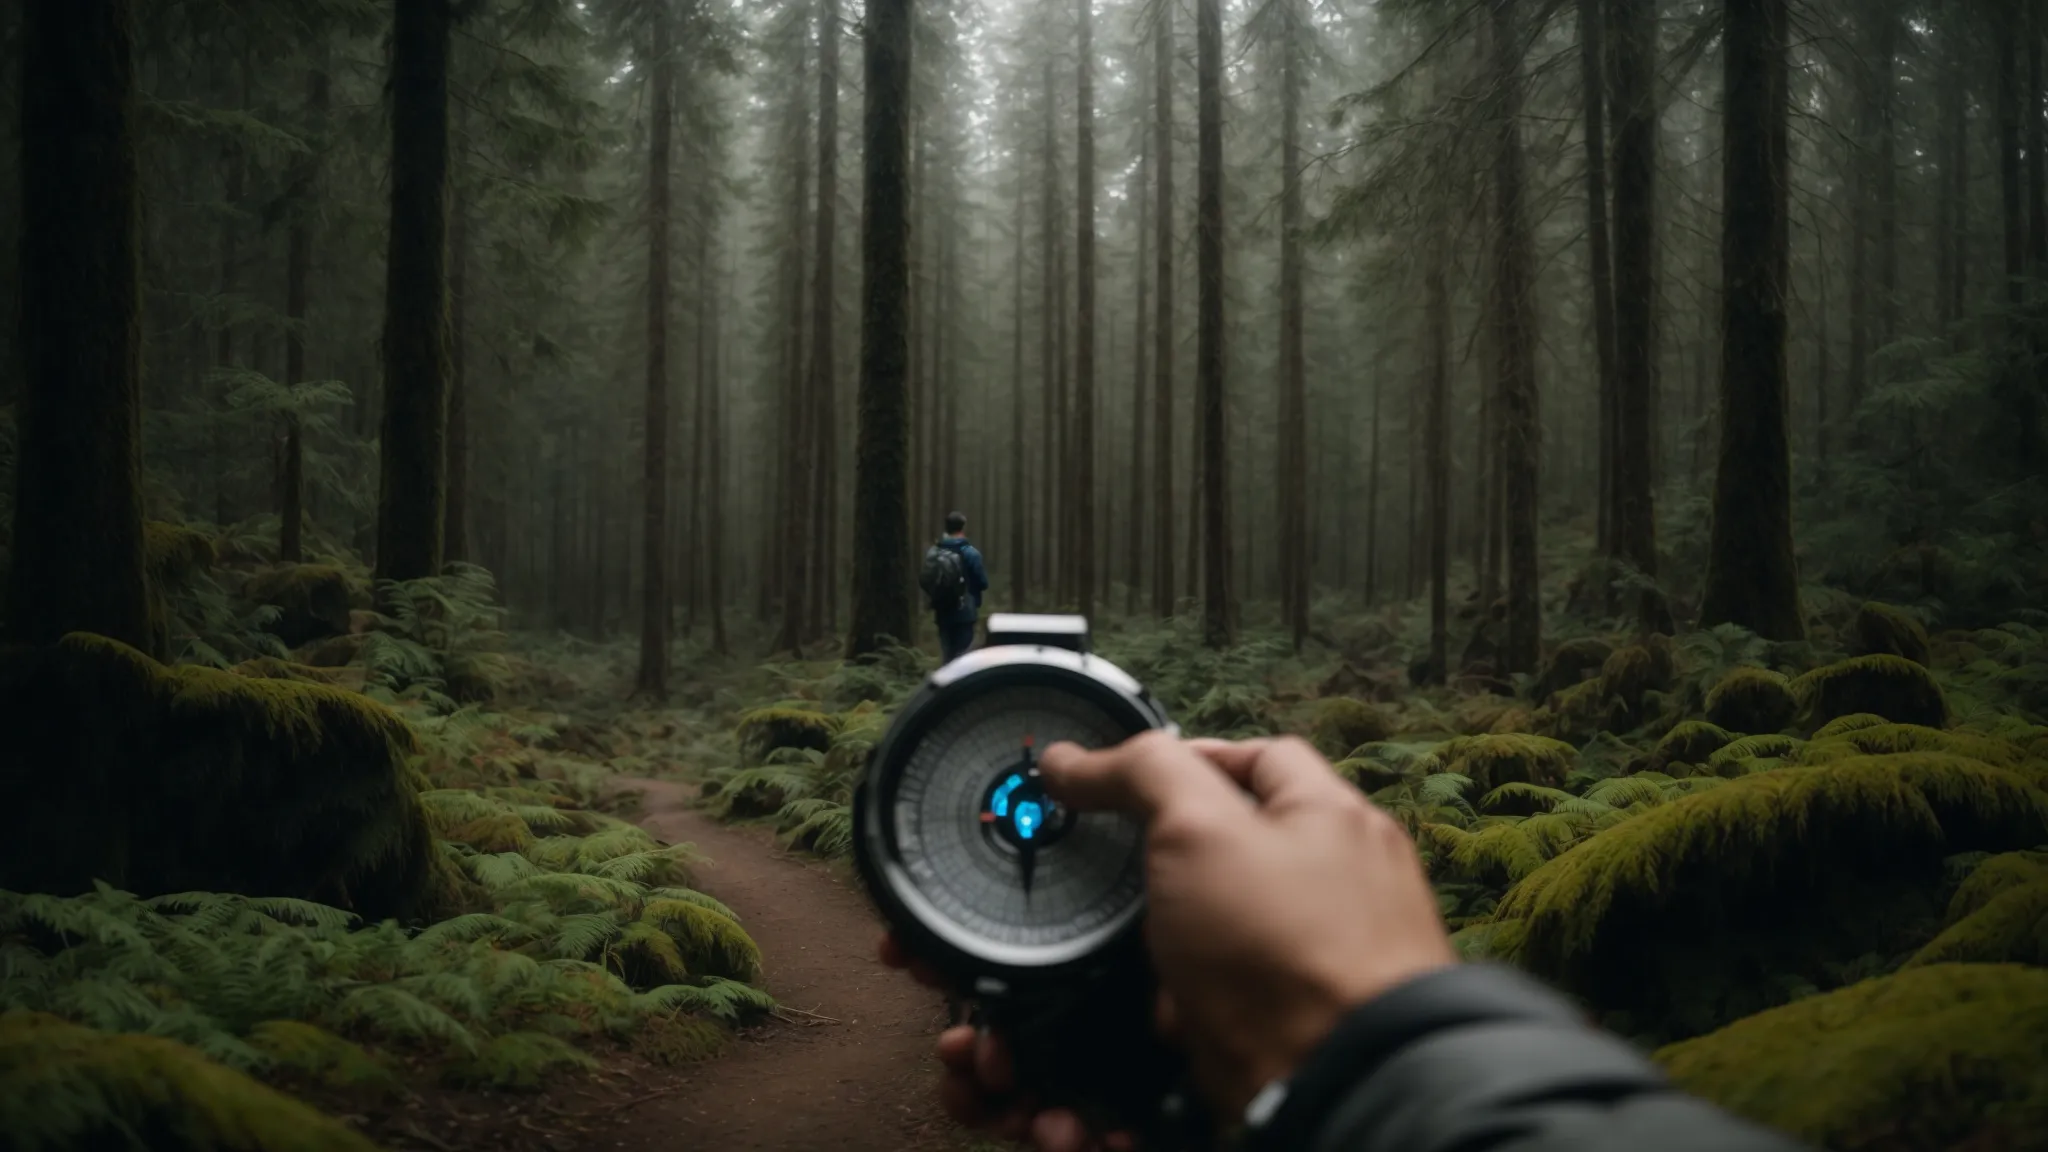 a person stands at the edge of a vast, pristine forest, peering into its depths with a digital compass in hand, symbolizing the journey of exploration powered by google's search engine.